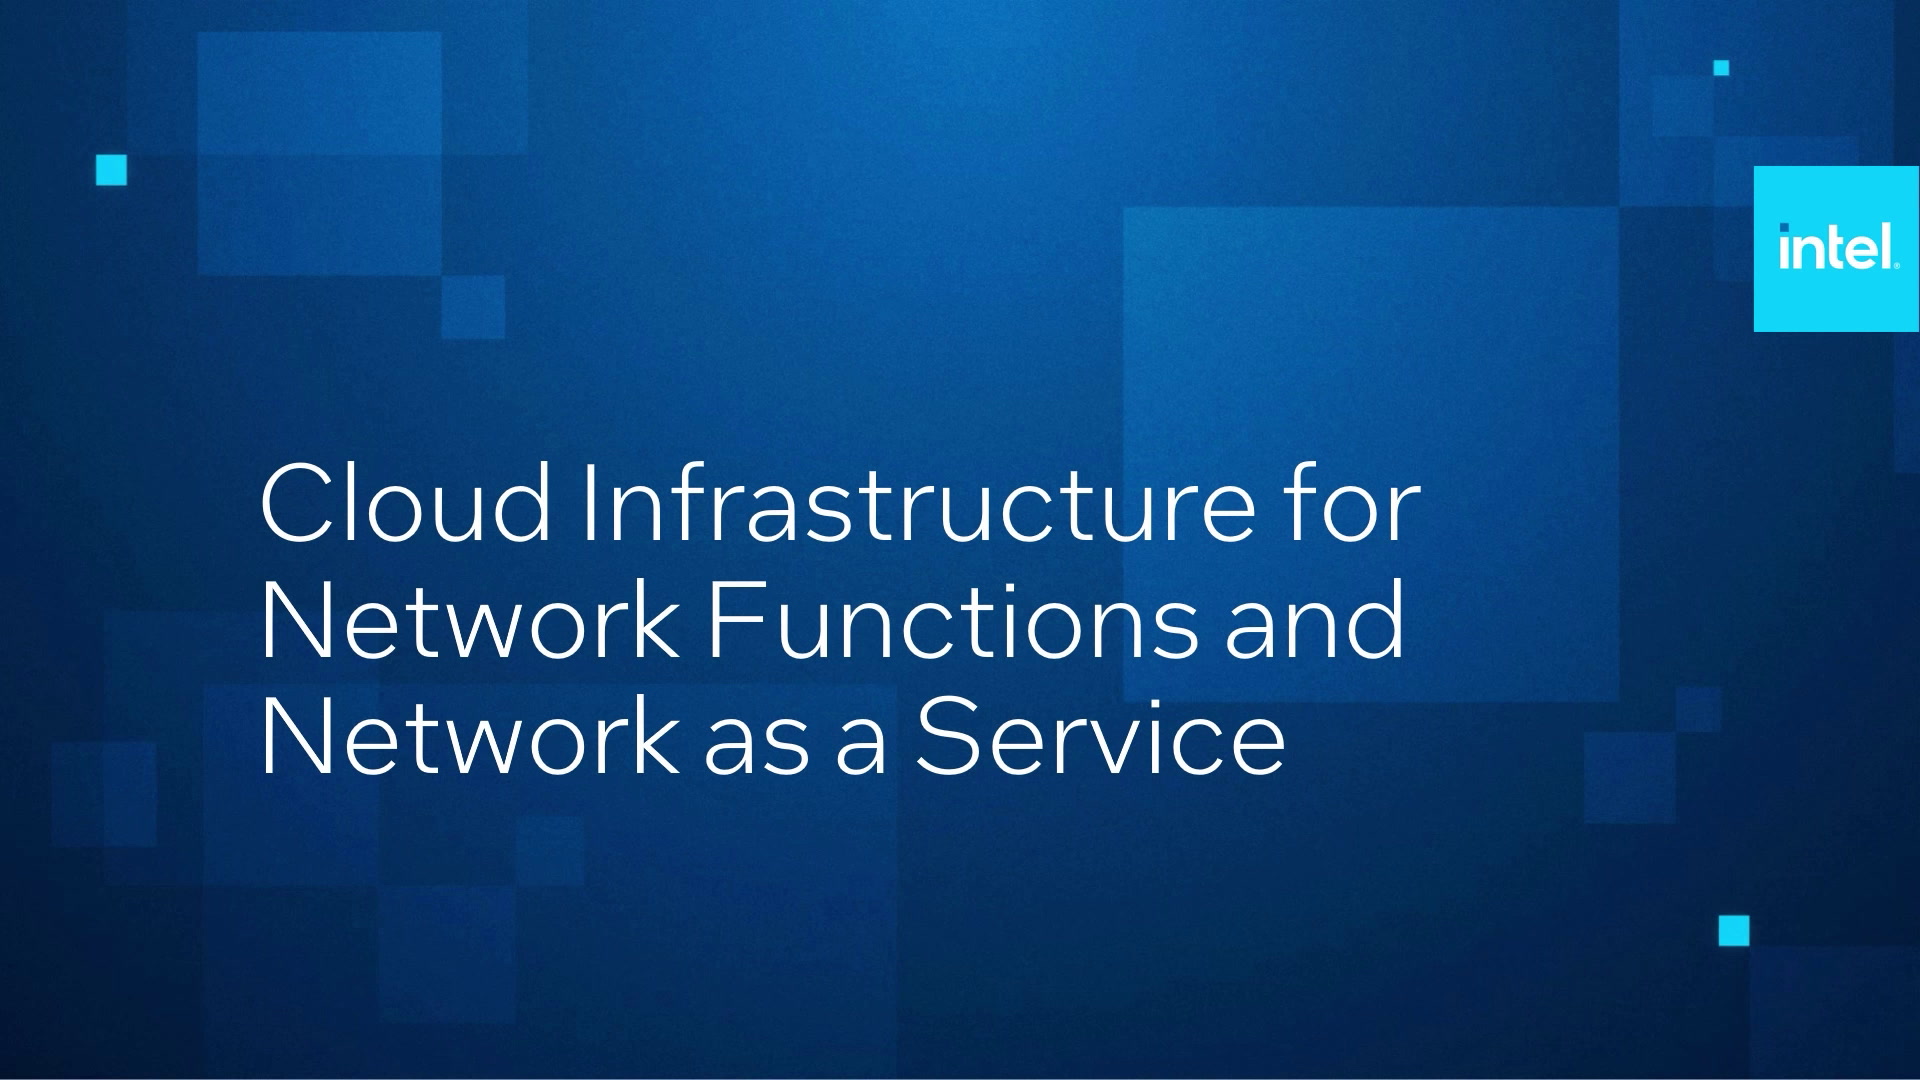 Cloud Infrastructure for Network Functions and Networking as a Service